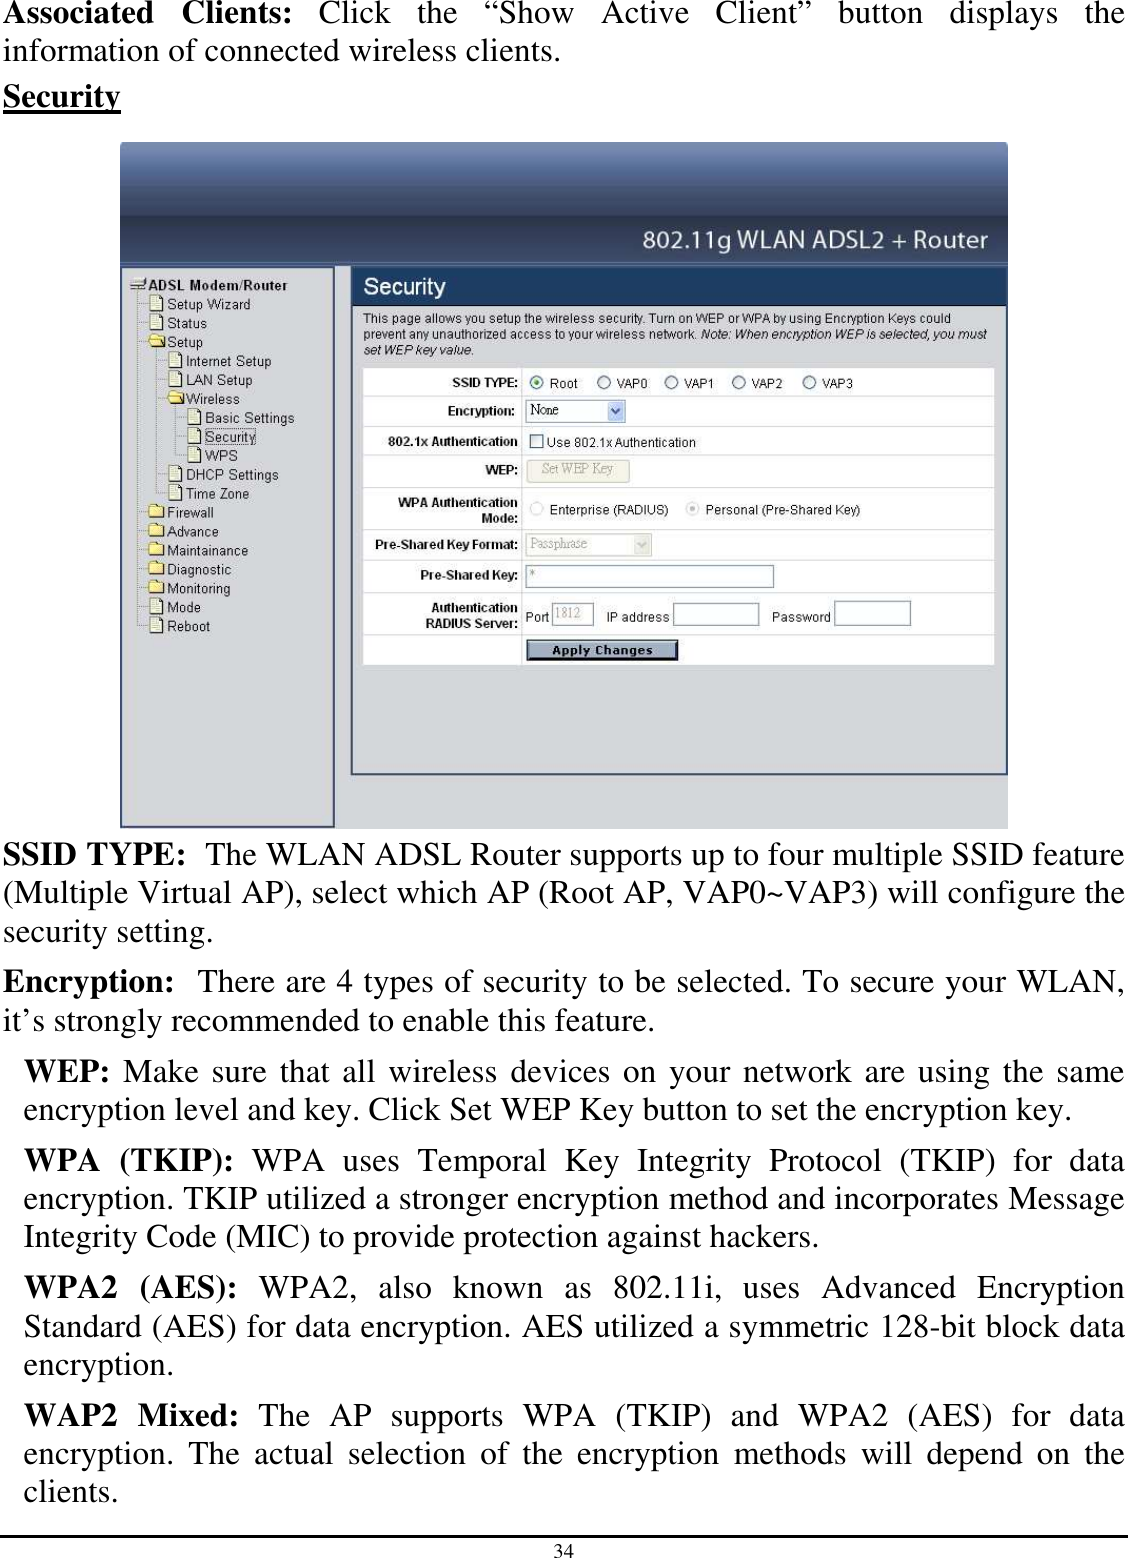 34 Associated  Clients:  Click  the  “Show  Active  Client”  button  displays  the information of connected wireless clients. Security   SSID TYPE:  The WLAN ADSL Router supports up to four multiple SSID feature (Multiple Virtual AP), select which AP (Root AP, VAP0~VAP3) will configure the security setting. Encryption:  There are 4 types of security to be selected. To secure your WLAN, it’s strongly recommended to enable this feature. WEP: Make sure that all wireless devices on your network are using the same encryption level and key. Click Set WEP Key button to set the encryption key. WPA  (TKIP):  WPA  uses  Temporal  Key  Integrity  Protocol  (TKIP)  for  data encryption. TKIP utilized a stronger encryption method and incorporates Message Integrity Code (MIC) to provide protection against hackers. WPA2  (AES):  WPA2,  also  known  as  802.11i,  uses  Advanced  Encryption Standard (AES) for data encryption. AES utilized a symmetric 128-bit block data encryption. WAP2  Mixed:  The  AP  supports  WPA  (TKIP)  and  WPA2  (AES)  for  data encryption.  The  actual  selection  of  the  encryption  methods  will  depend  on  the clients. 